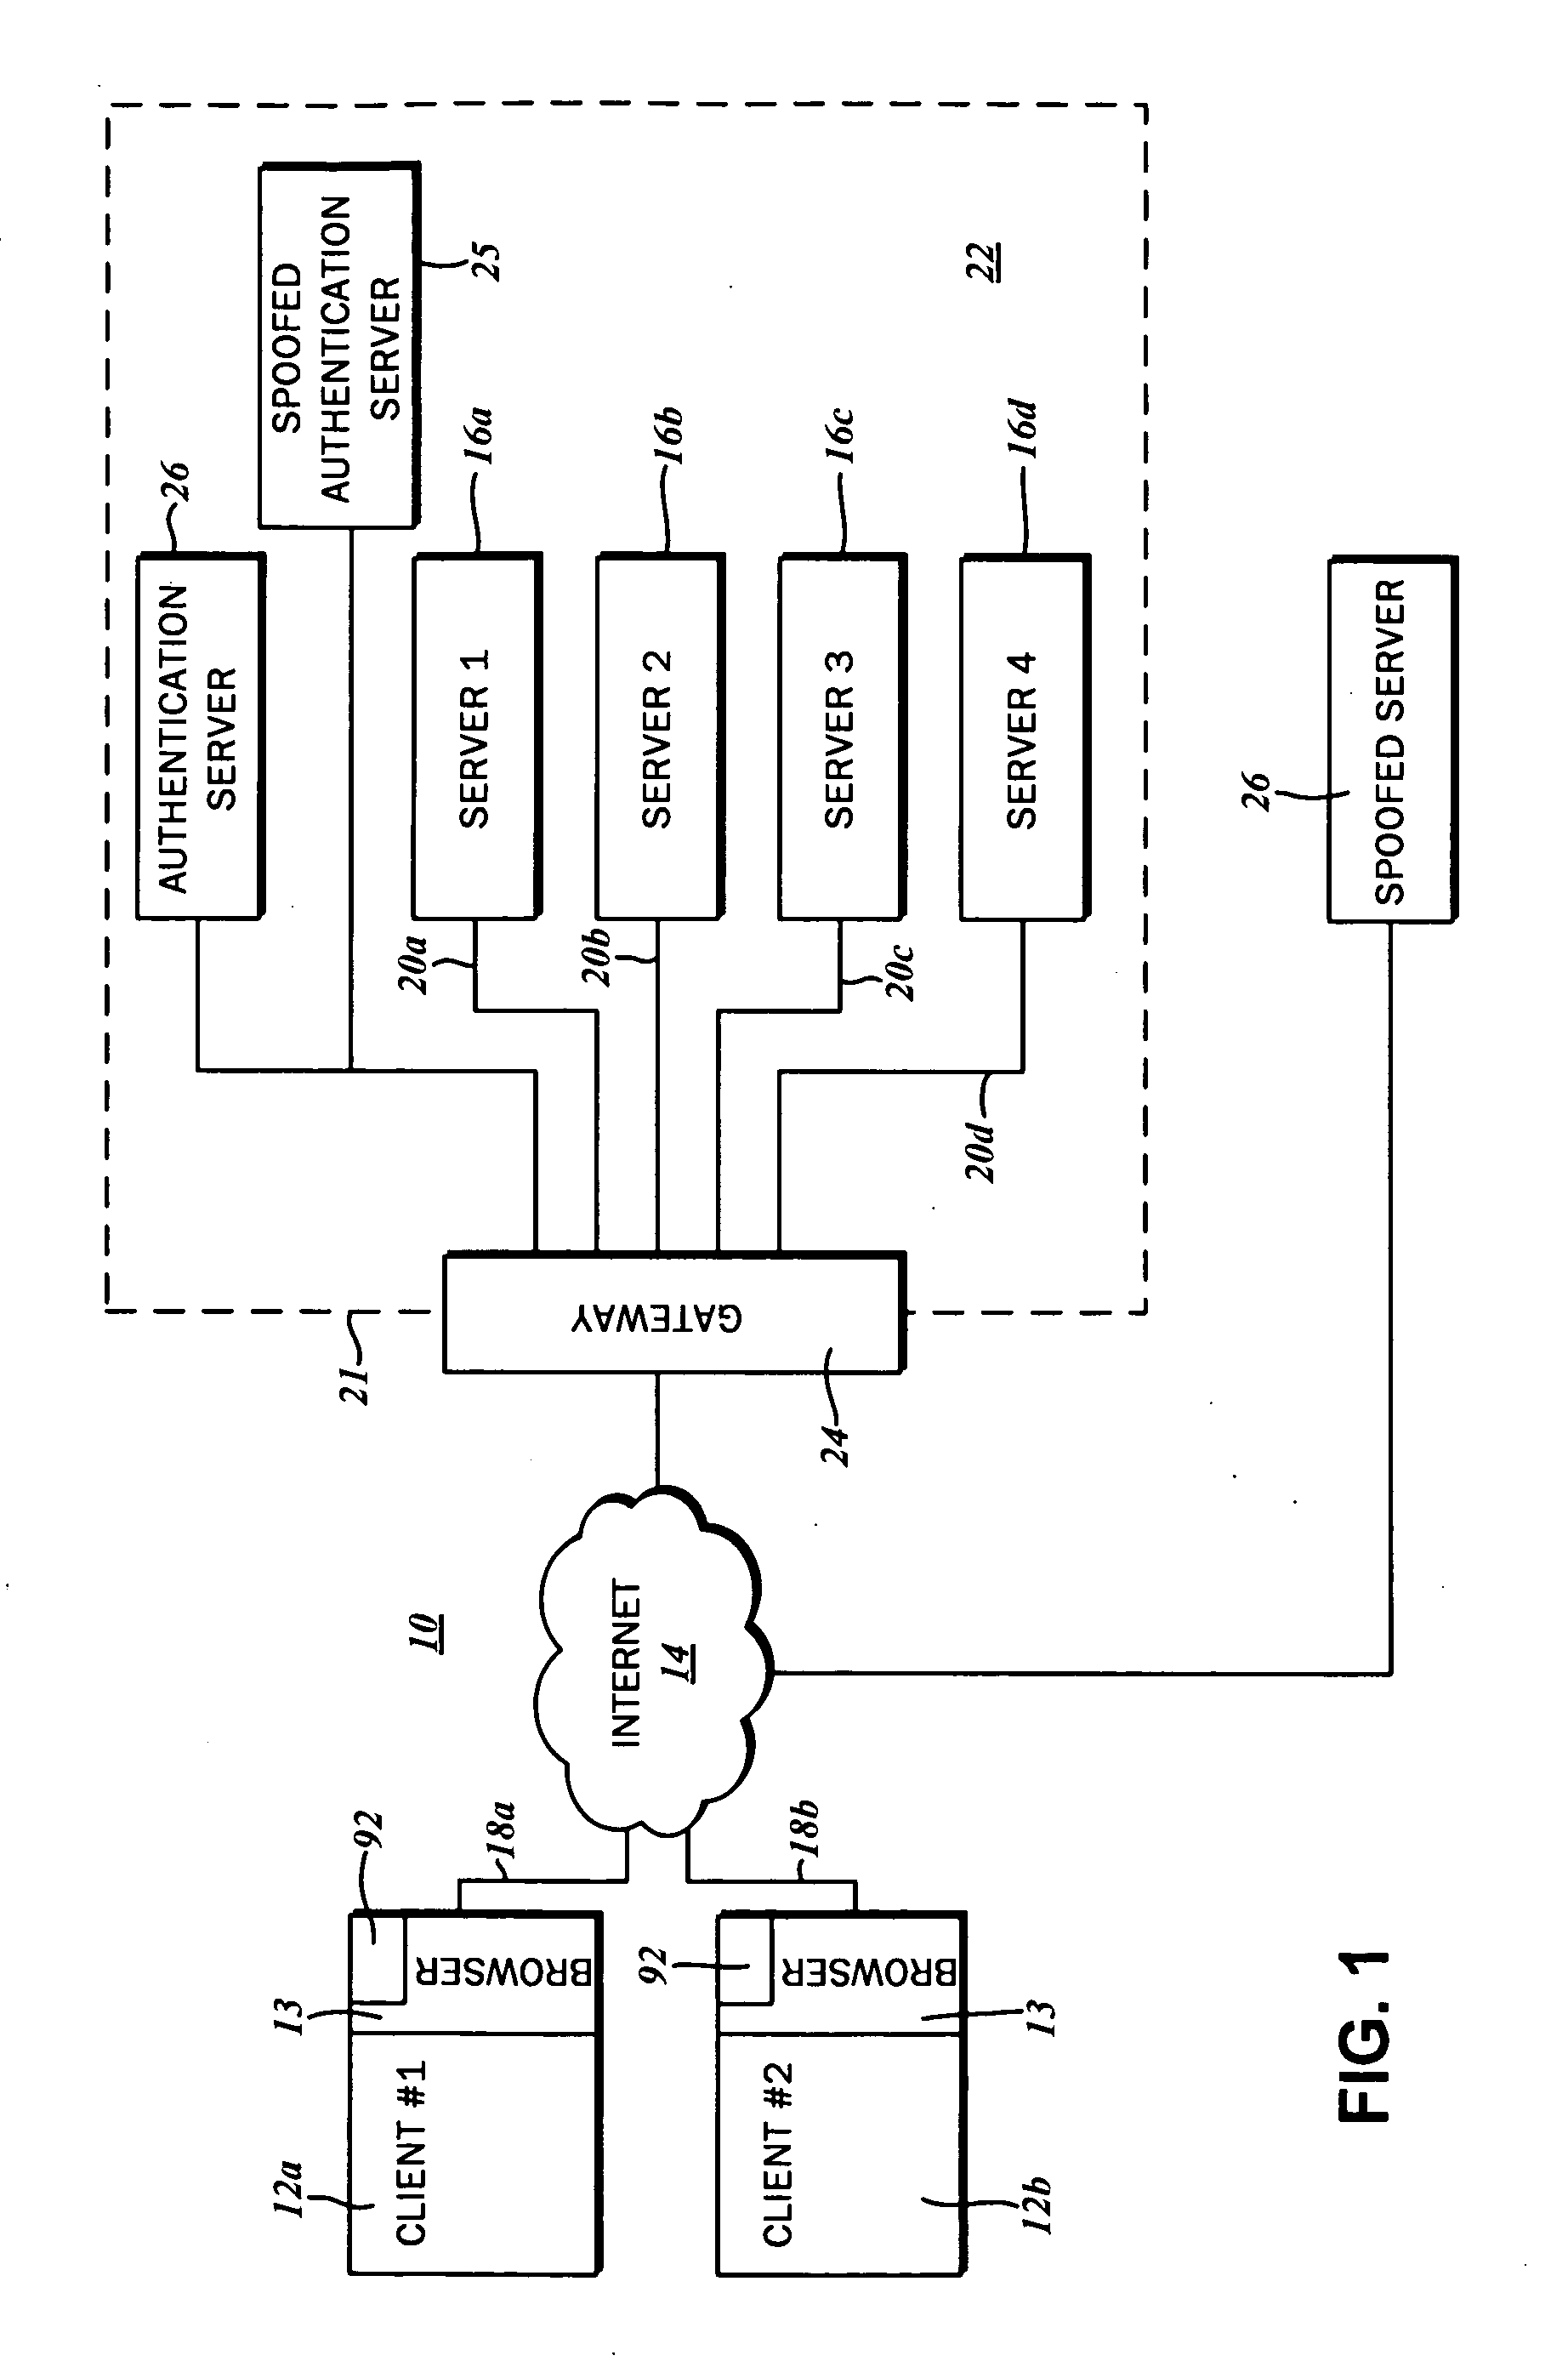 Method and system for secure online transactions with message-level validation